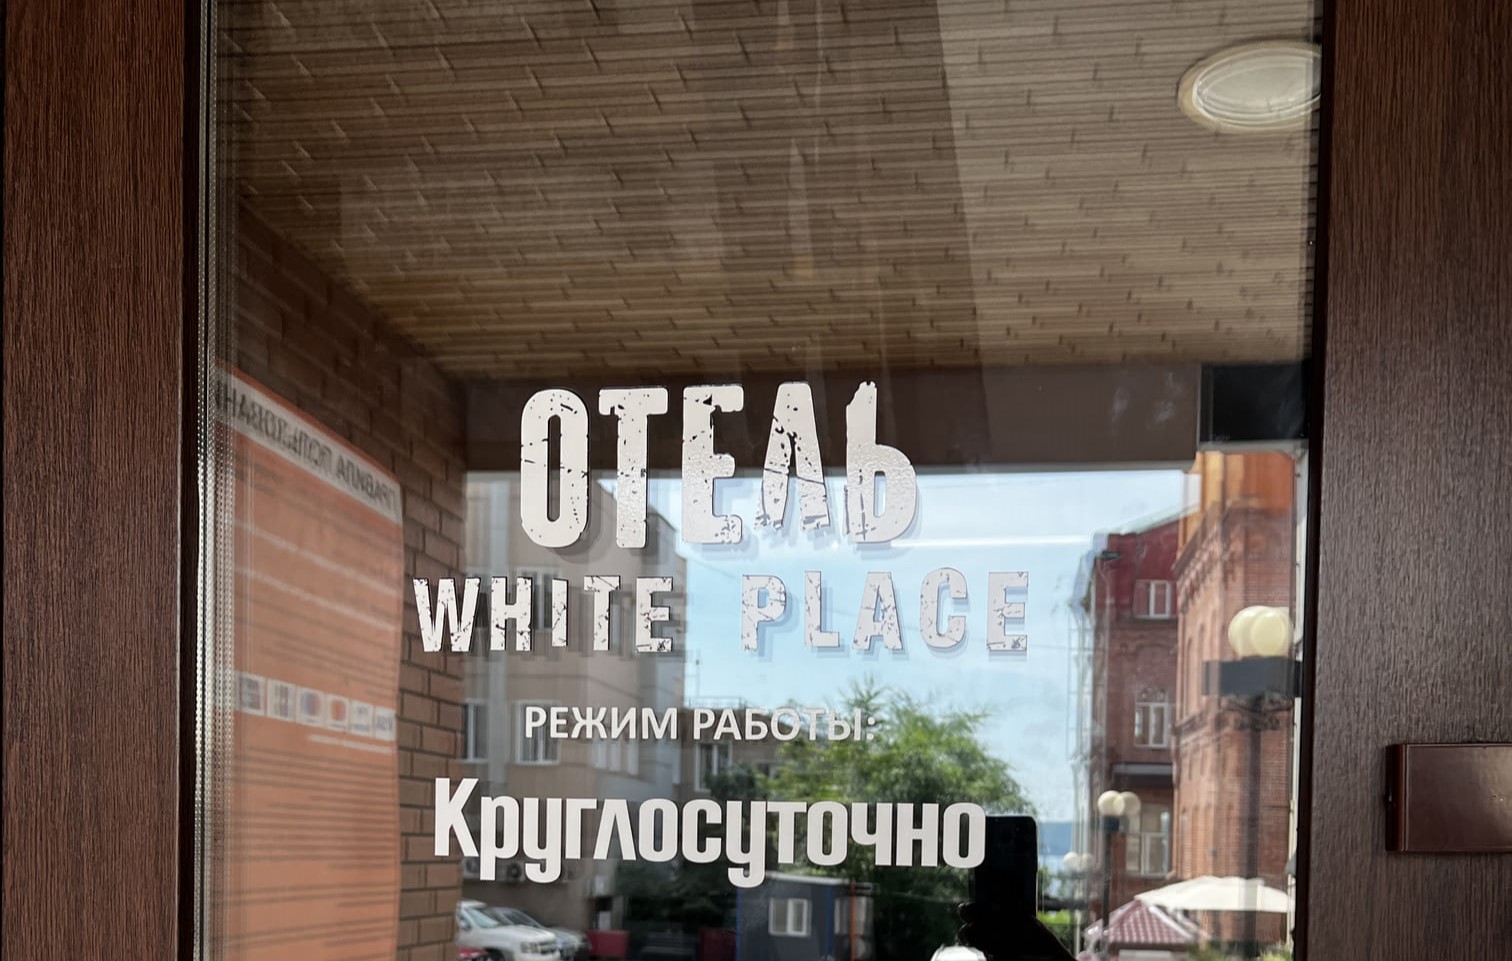 White place